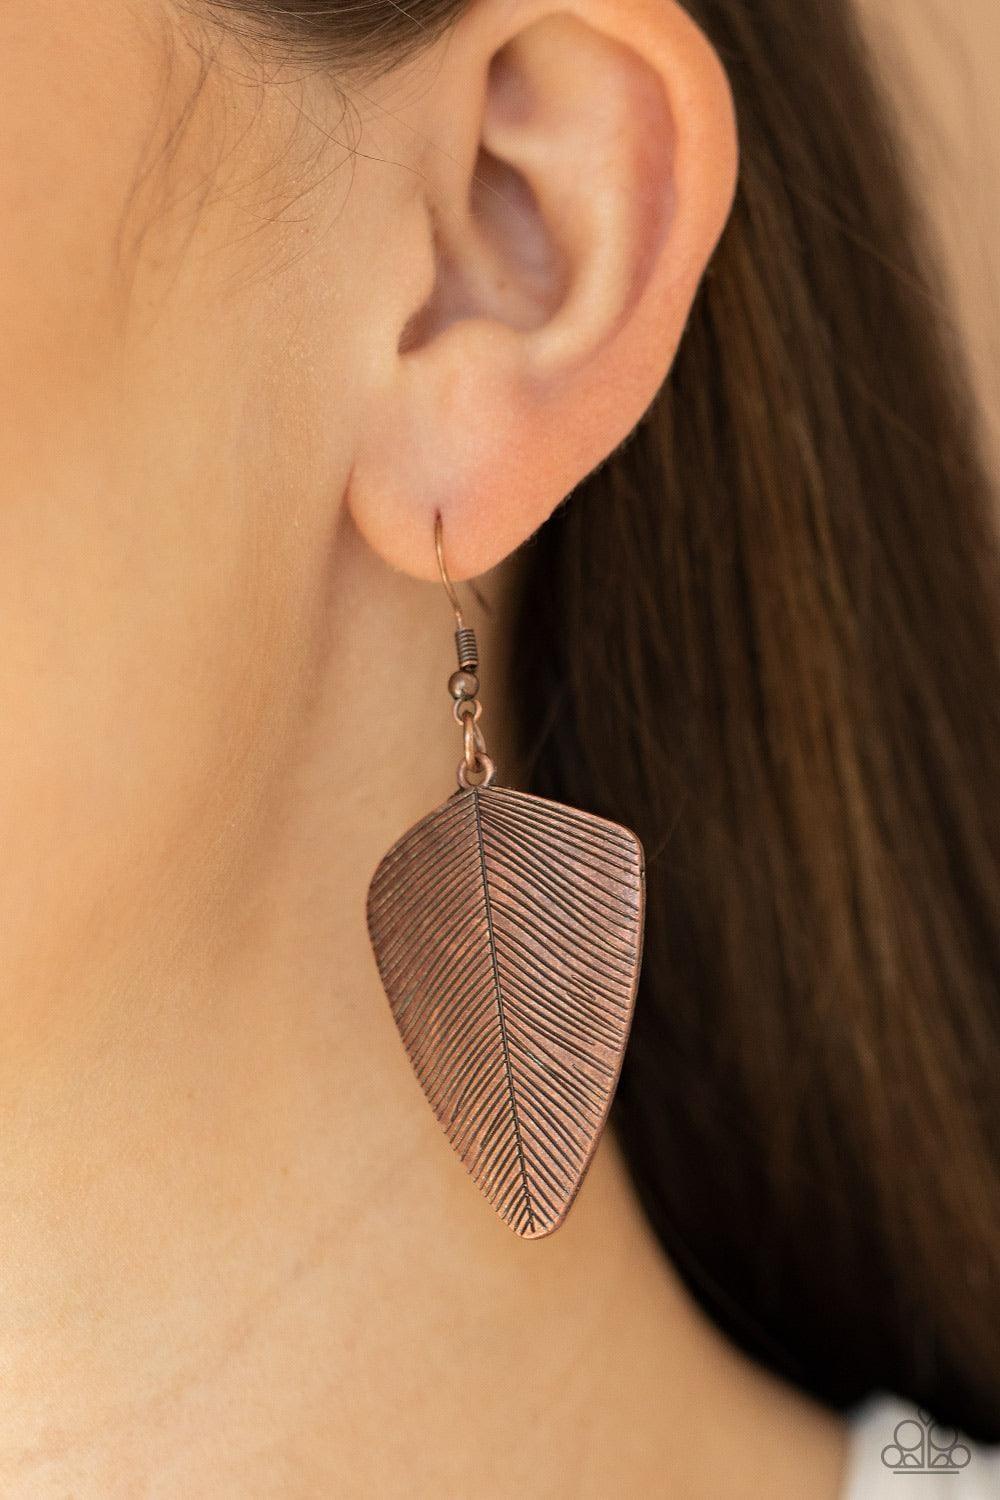 Paparazzi Accessories - One Of The Flock - Copper Earrings - Bling by JessieK